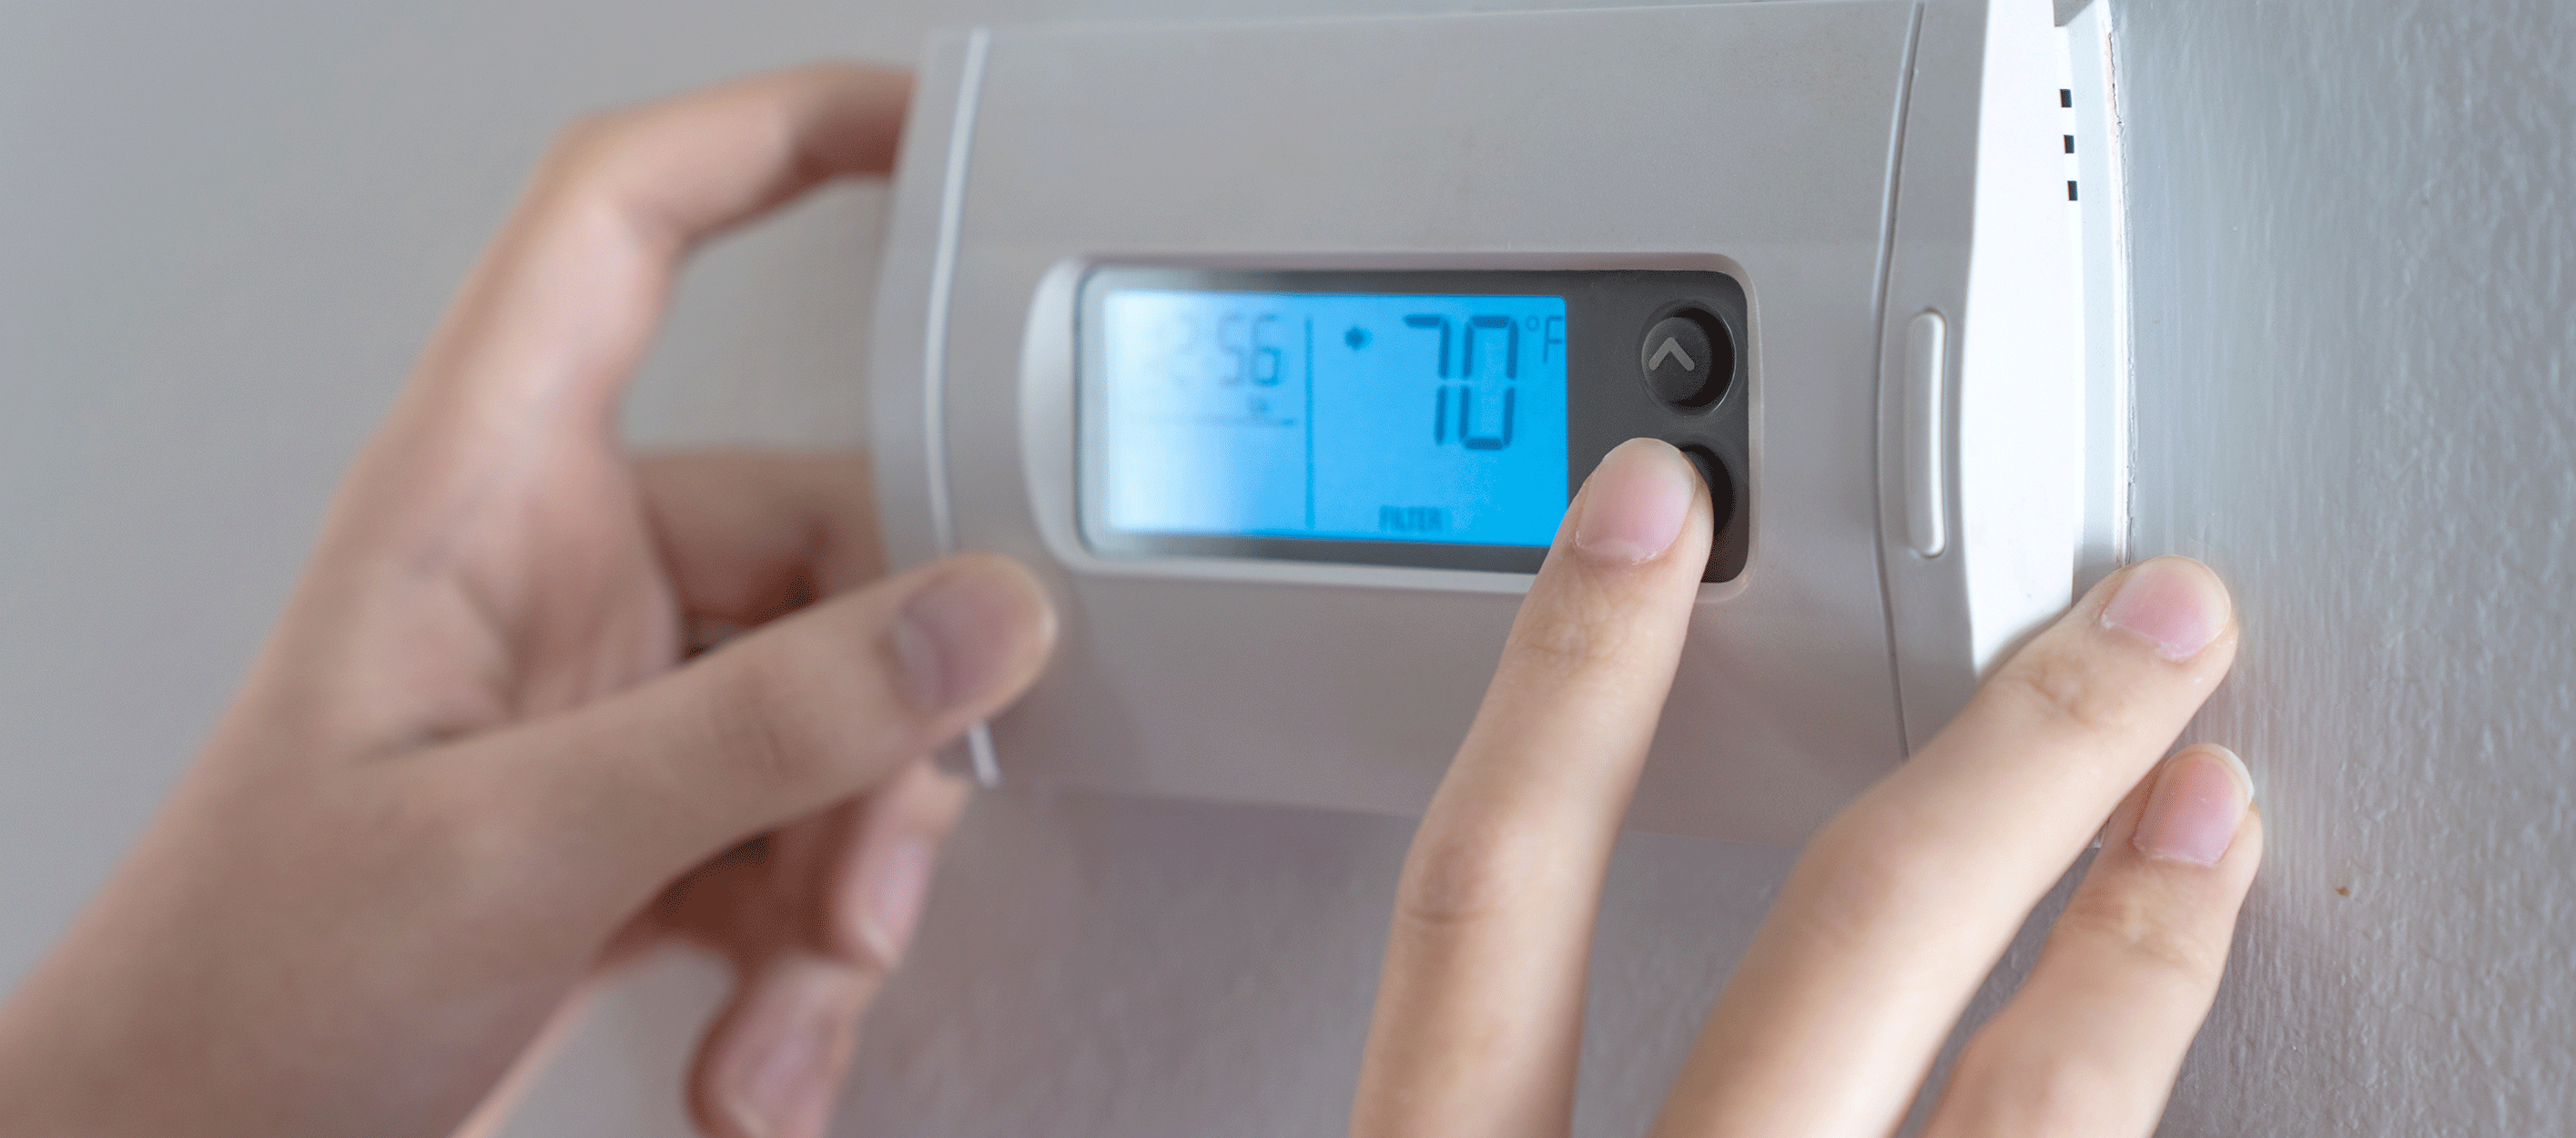 thermostat set at 70 degrees